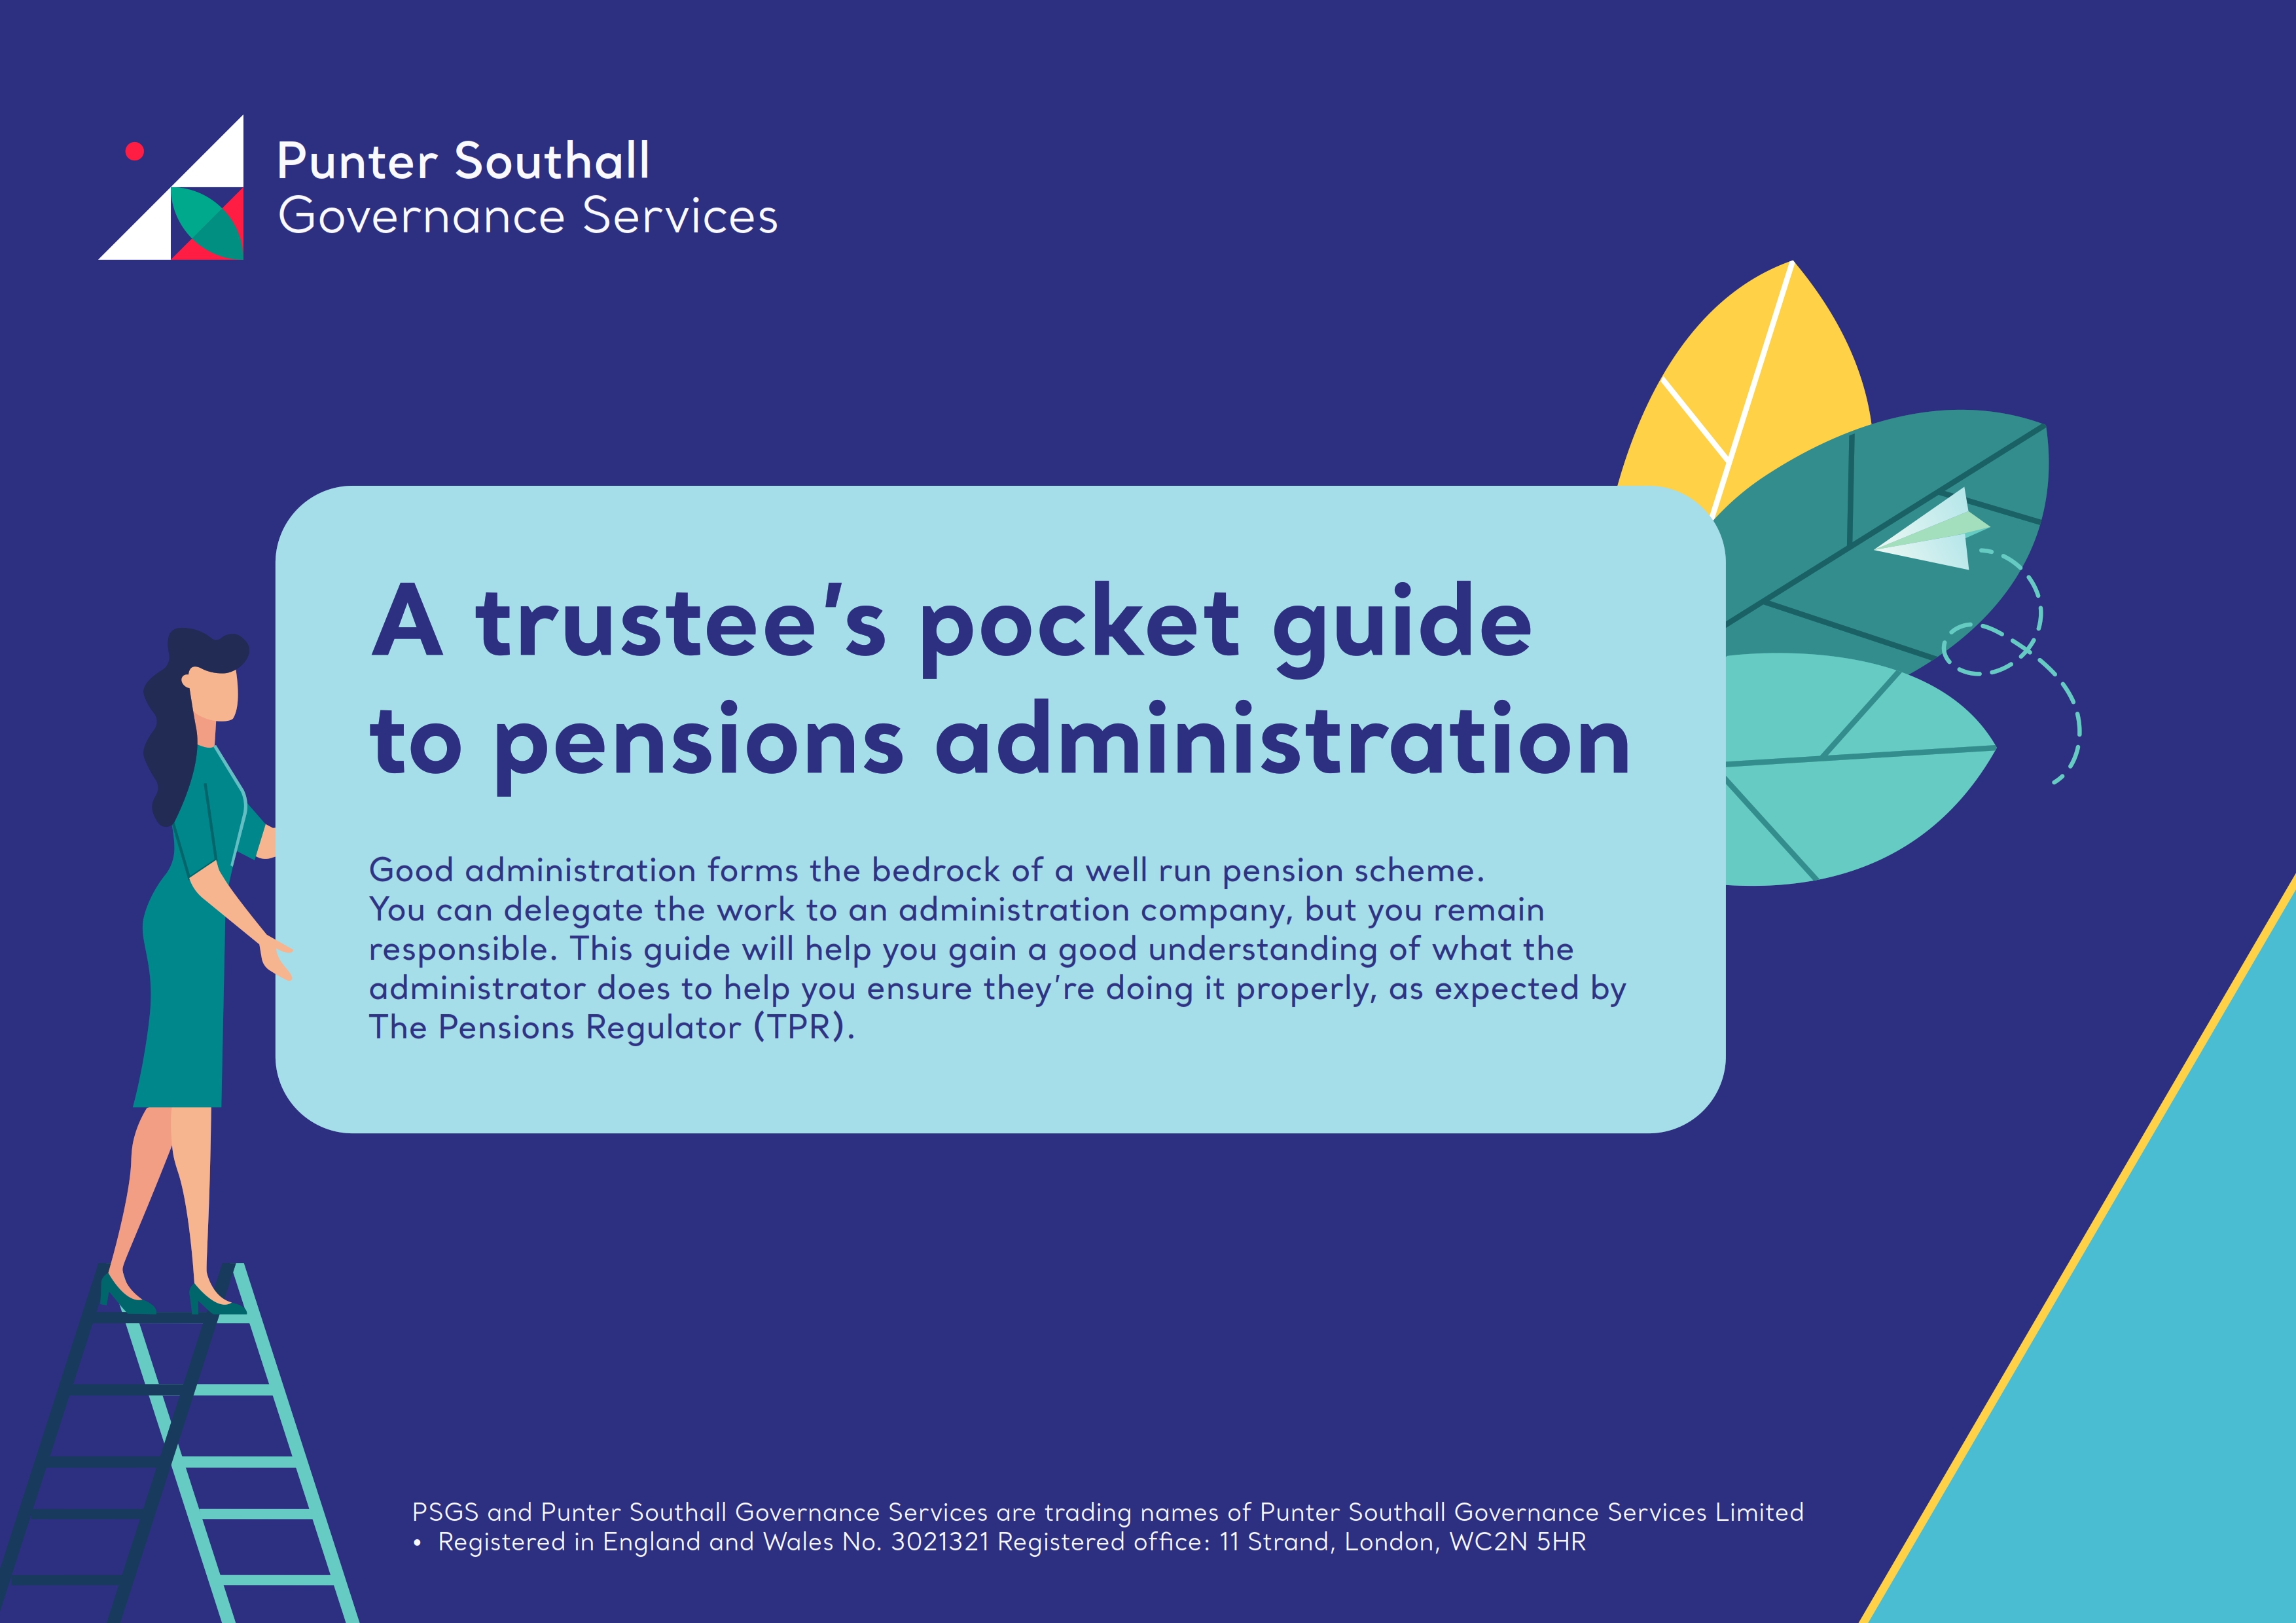 Image for opinion “A trustee’s pocket guide to pensions administration”